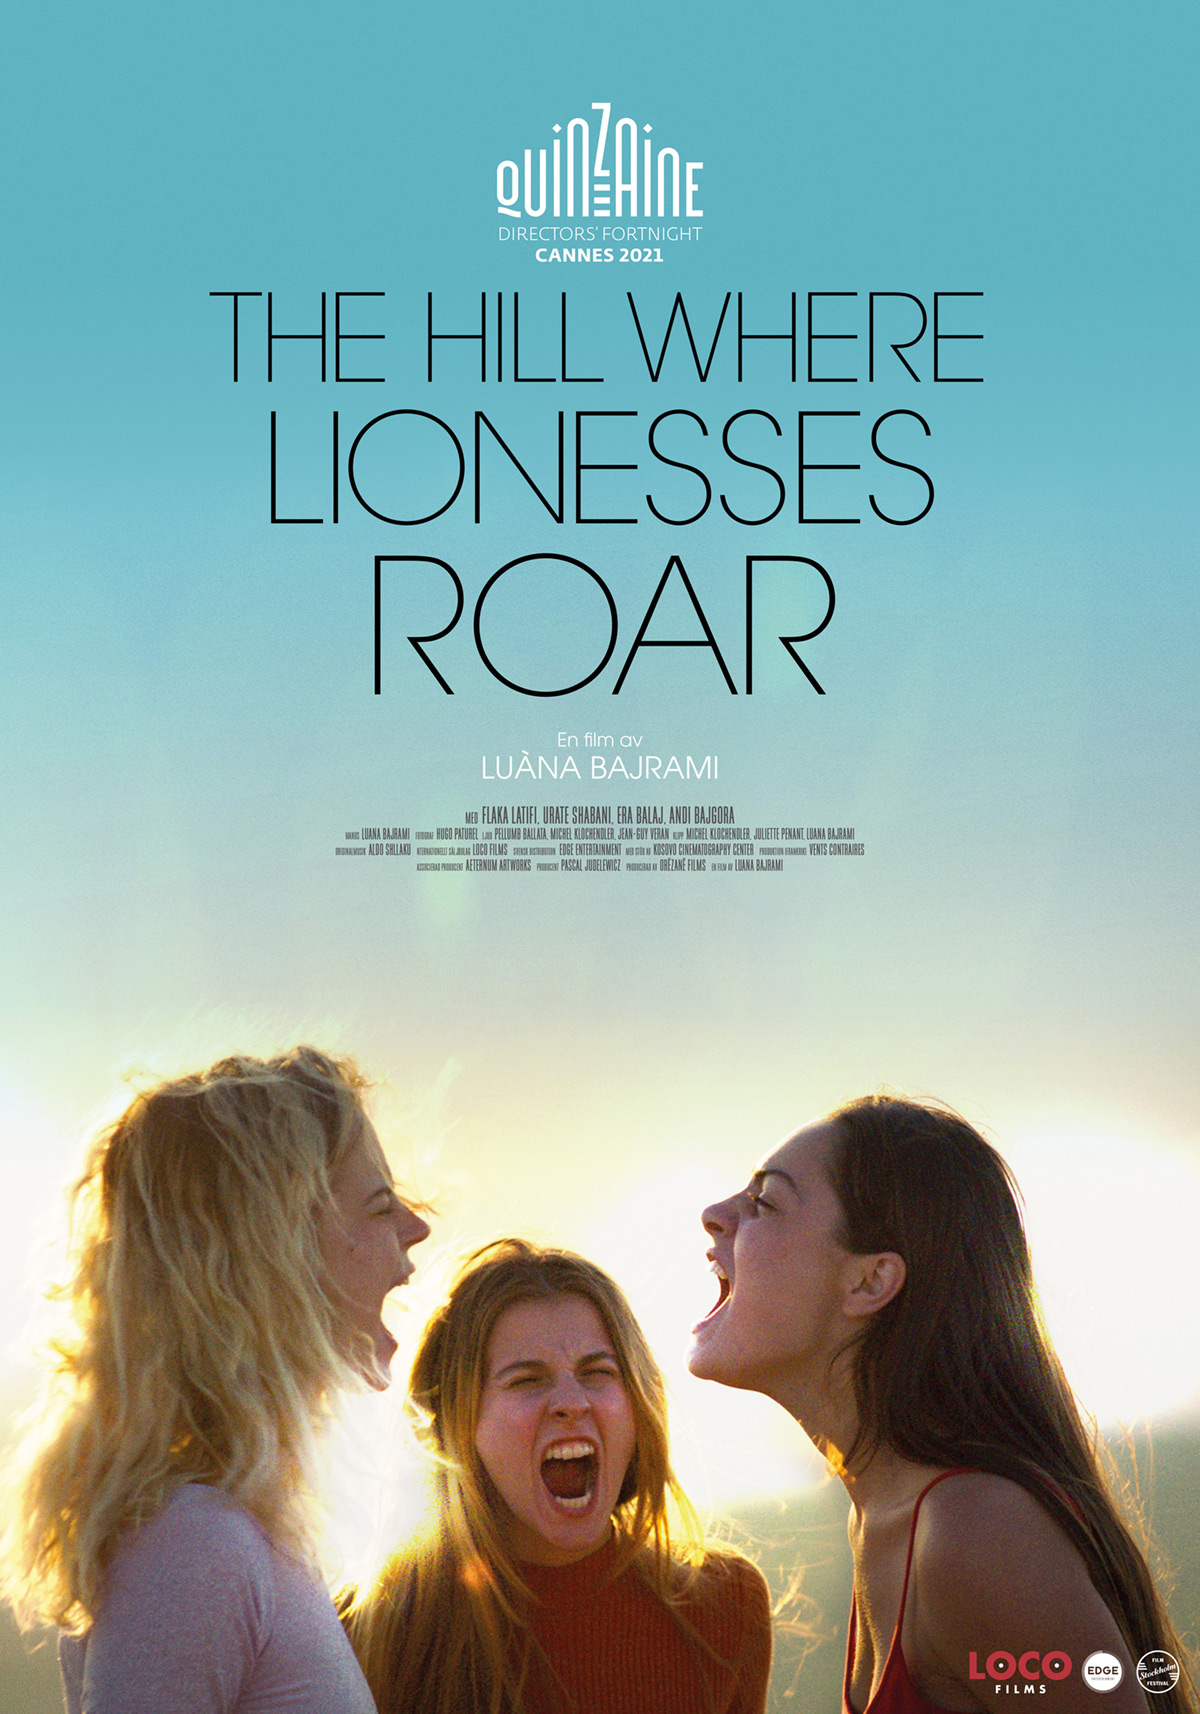 THE HILL WHERE LIONESSES ROAR